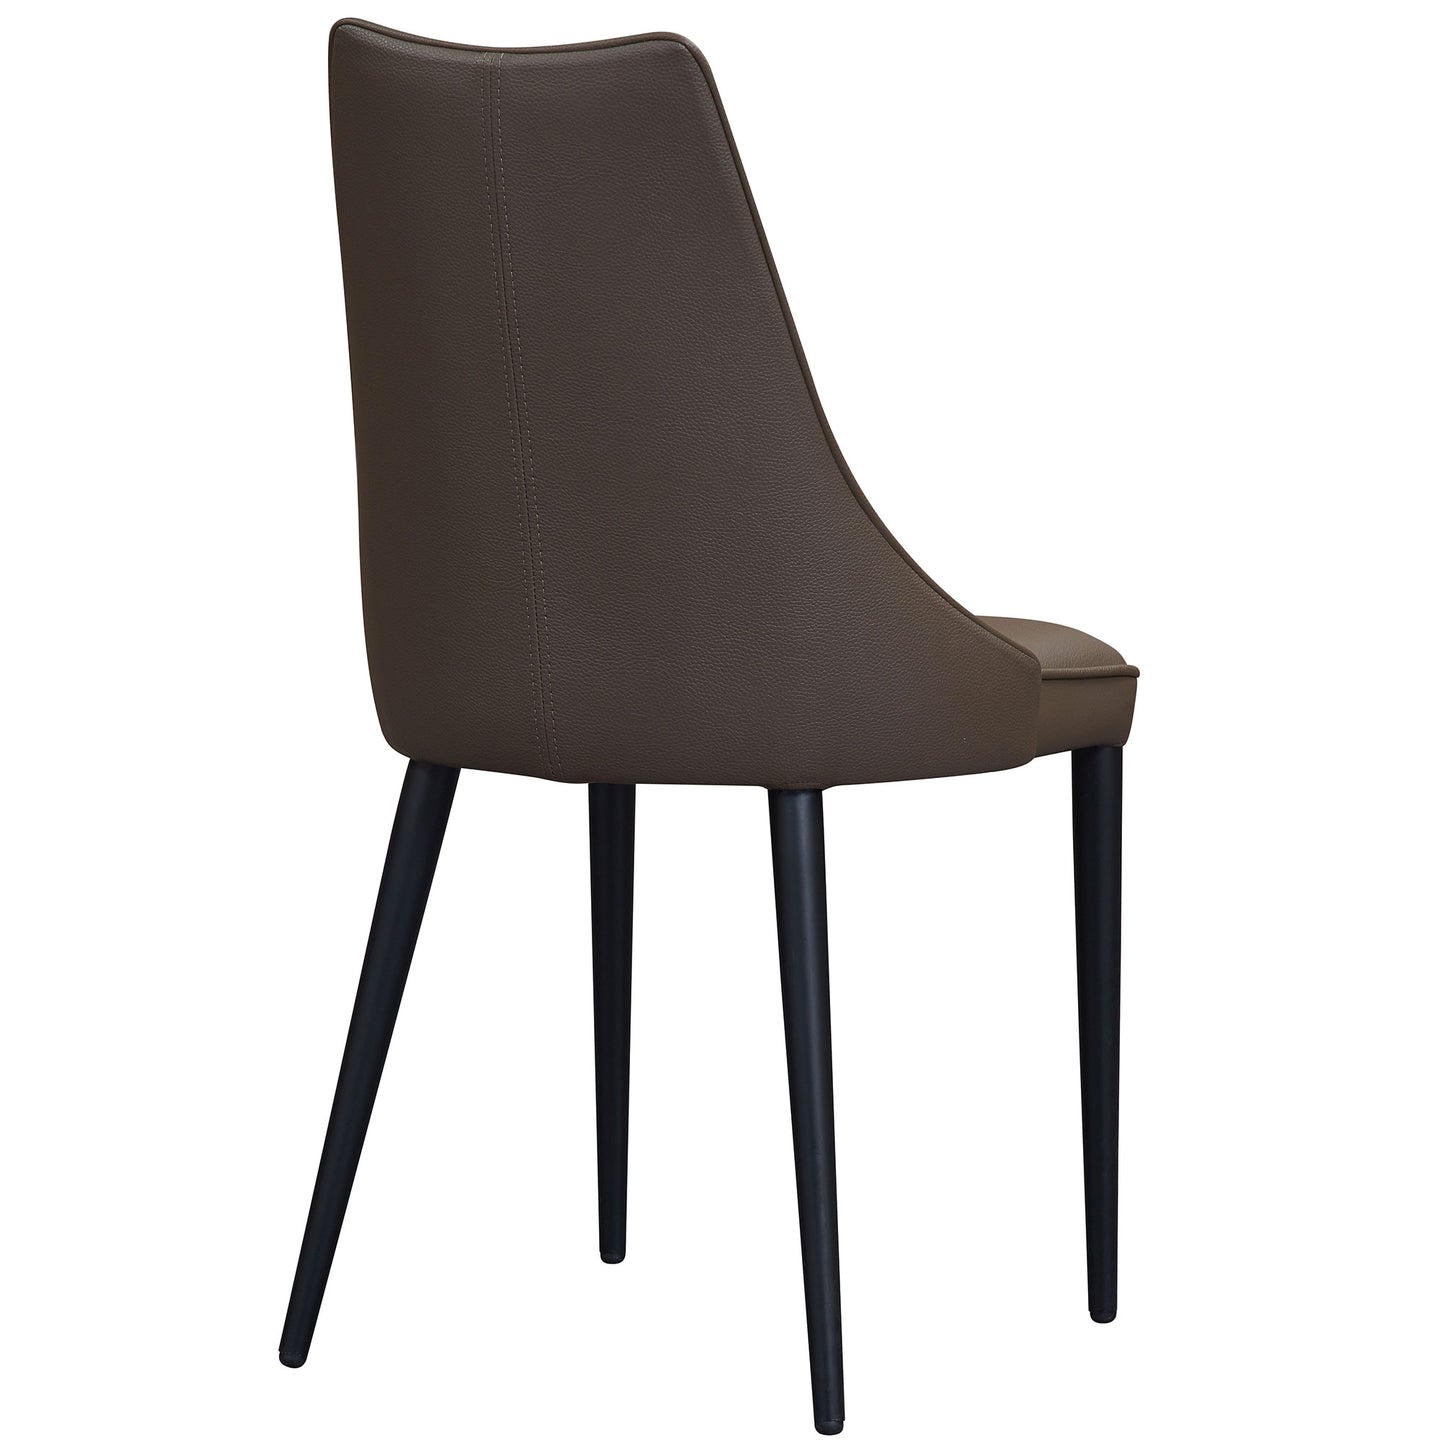 Milano Leather Dining Chair Chocolate by JM